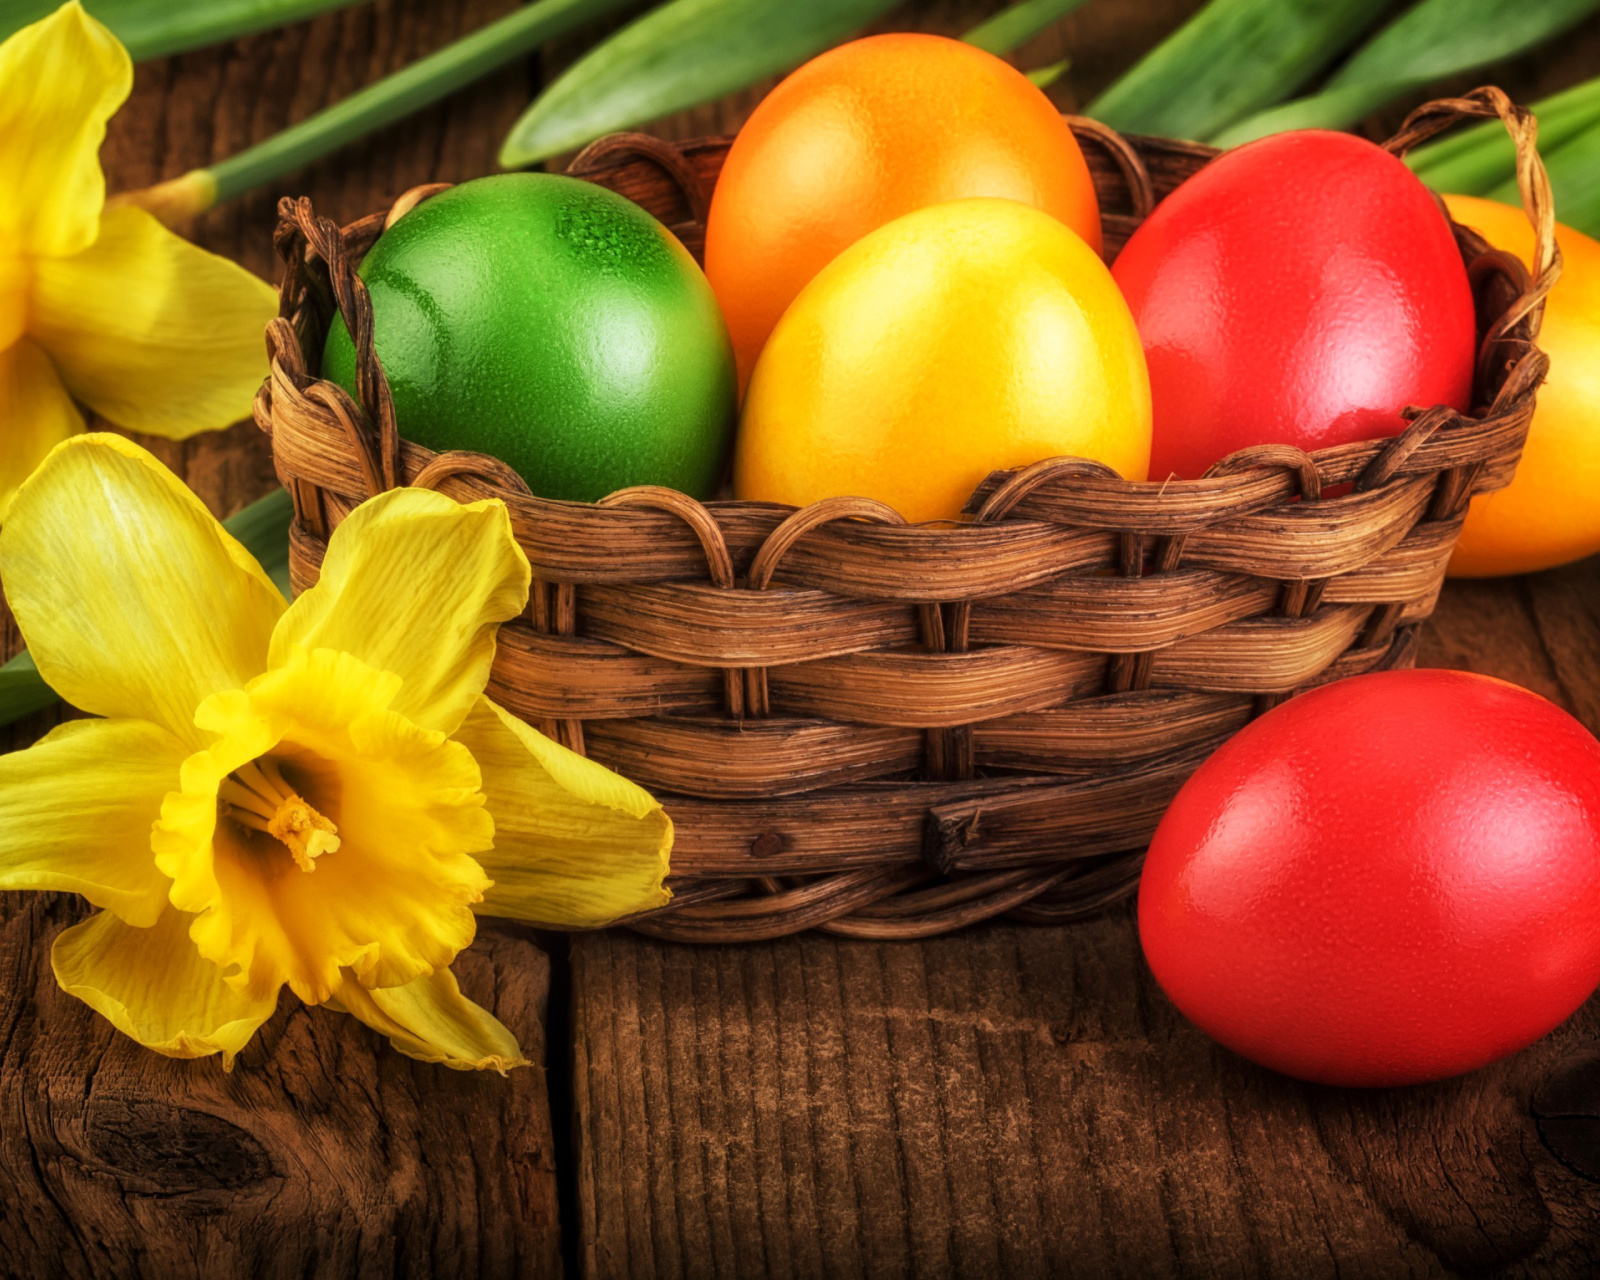 Daffodils and Easter Eggs wallpaper 1600x1280